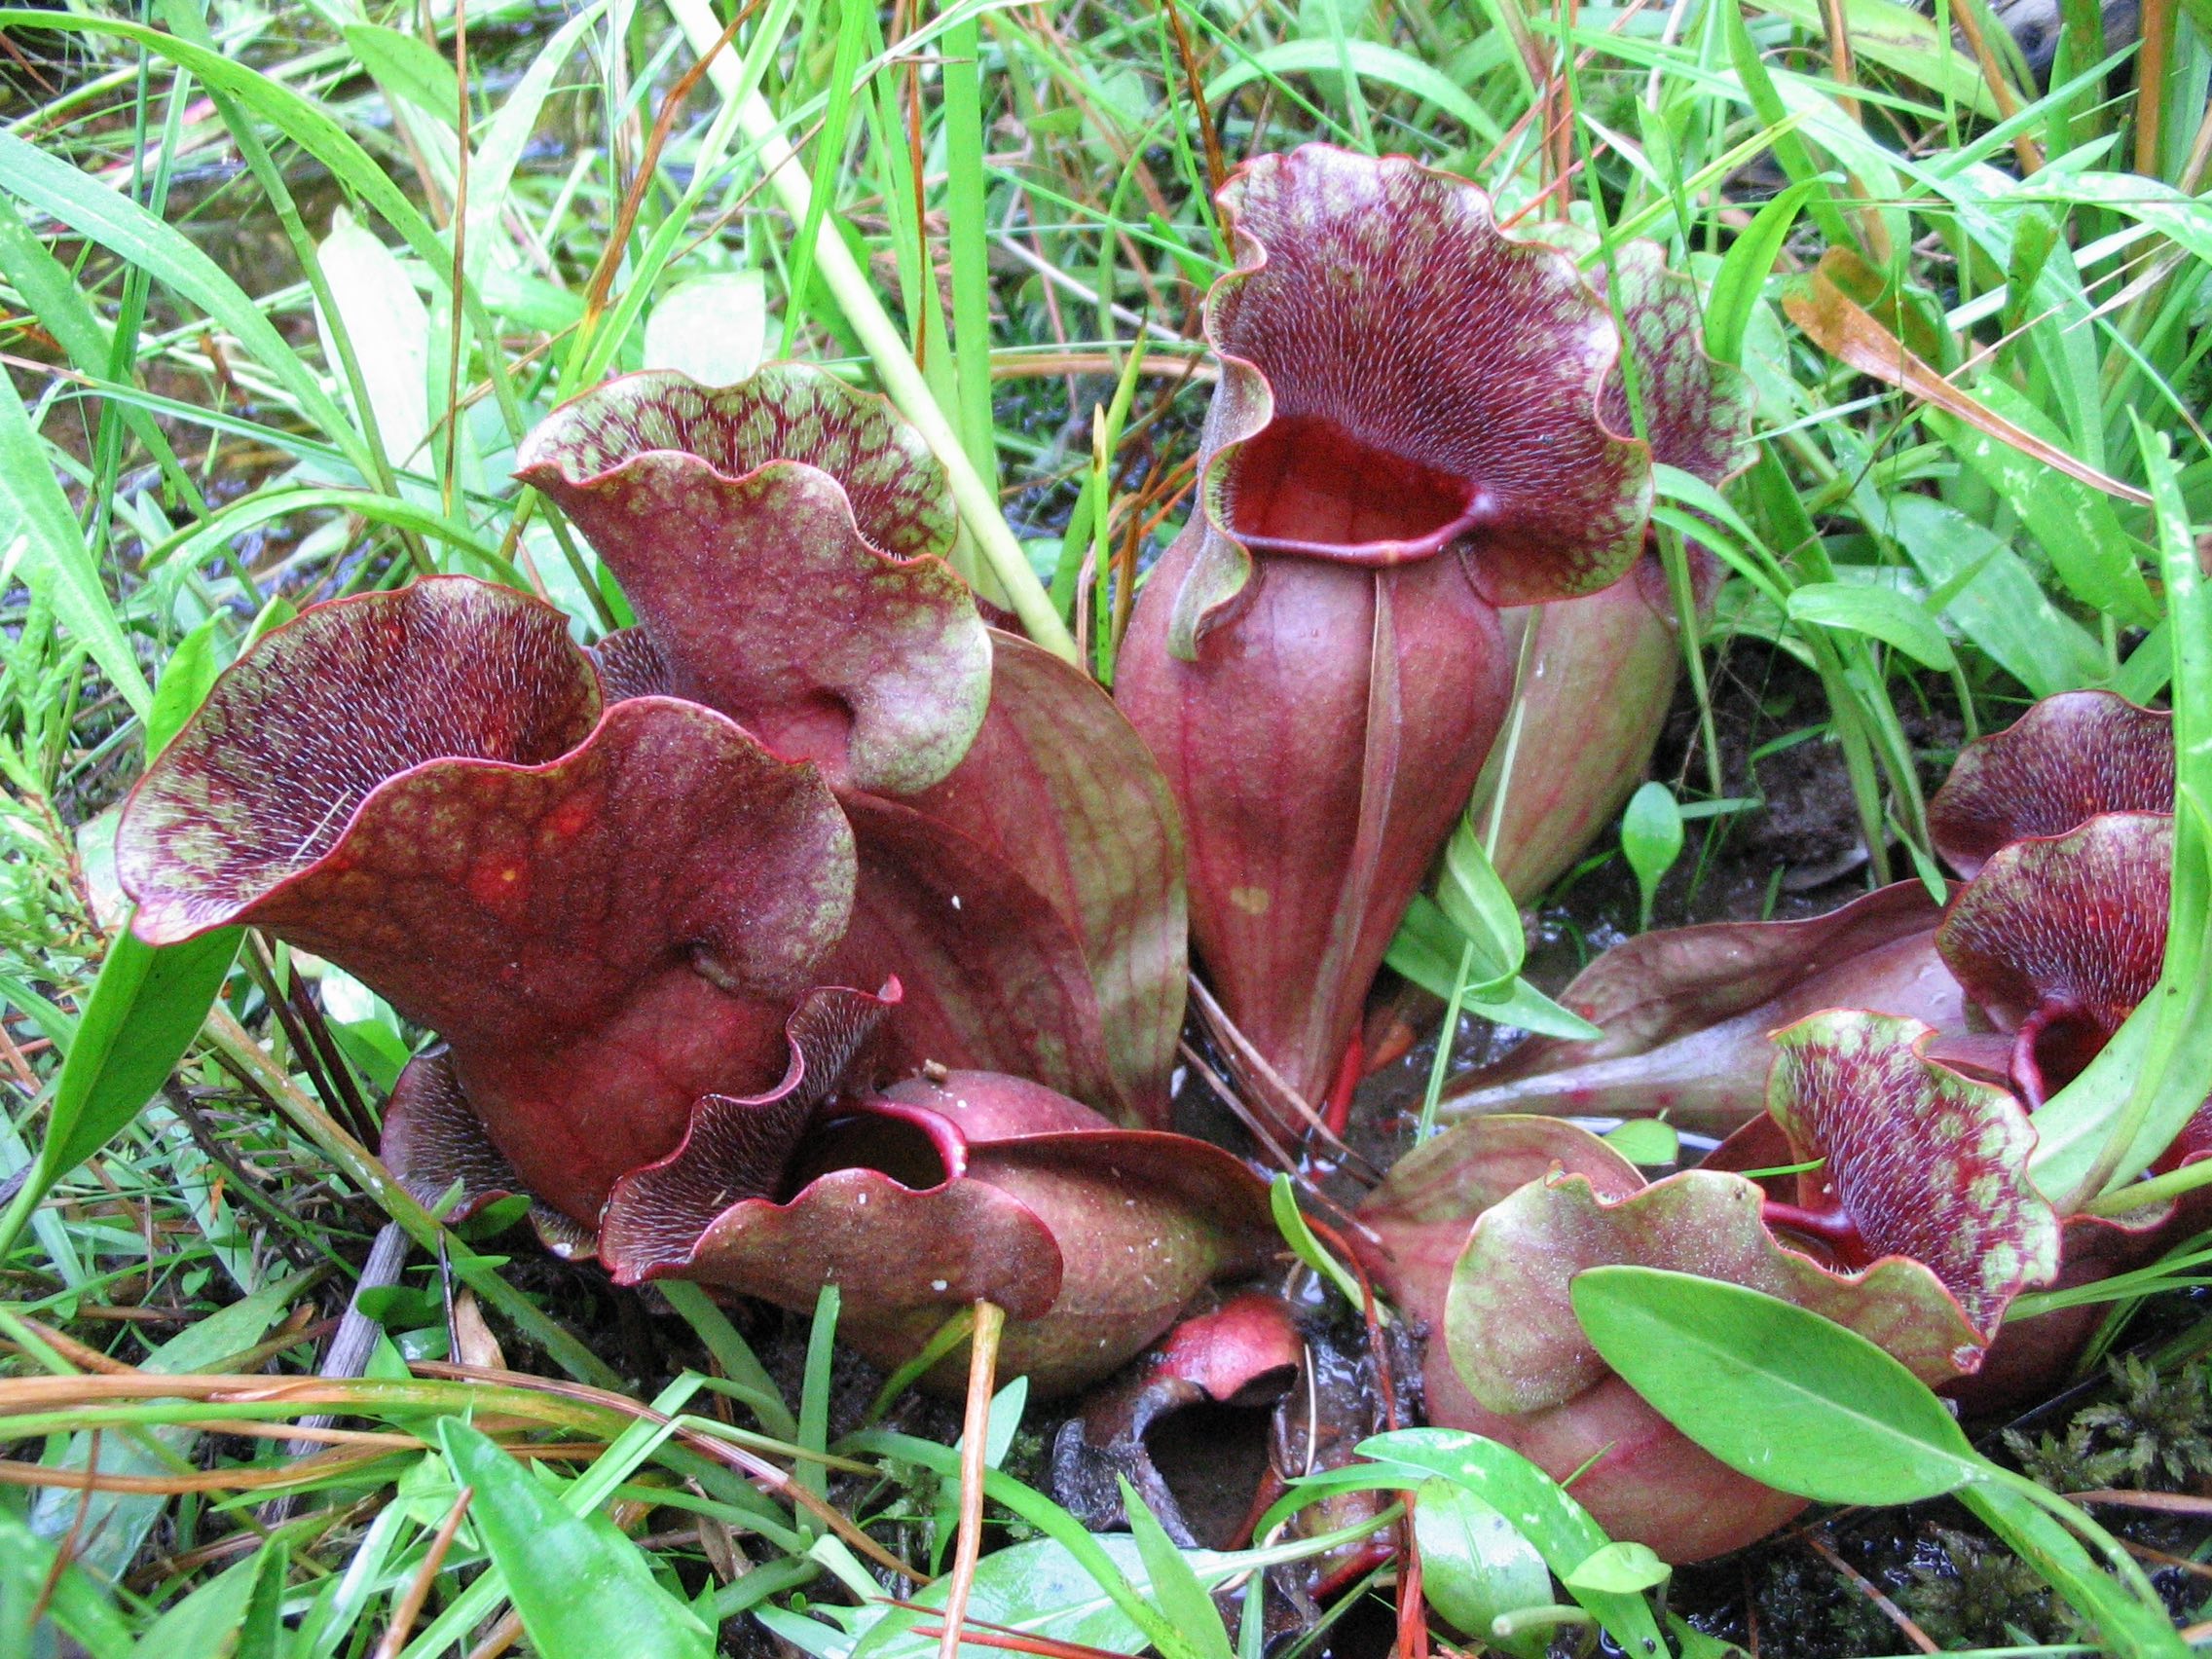 The Scientific Name is Sarracenia purpurea var. venosa. You will likely hear them called Southern Purple Pitcherplant, Pitcher-plant. This picture shows the The pitchers are fatter and less numerous than other Sarracenia purpurea varieties. of Sarracenia purpurea var. venosa